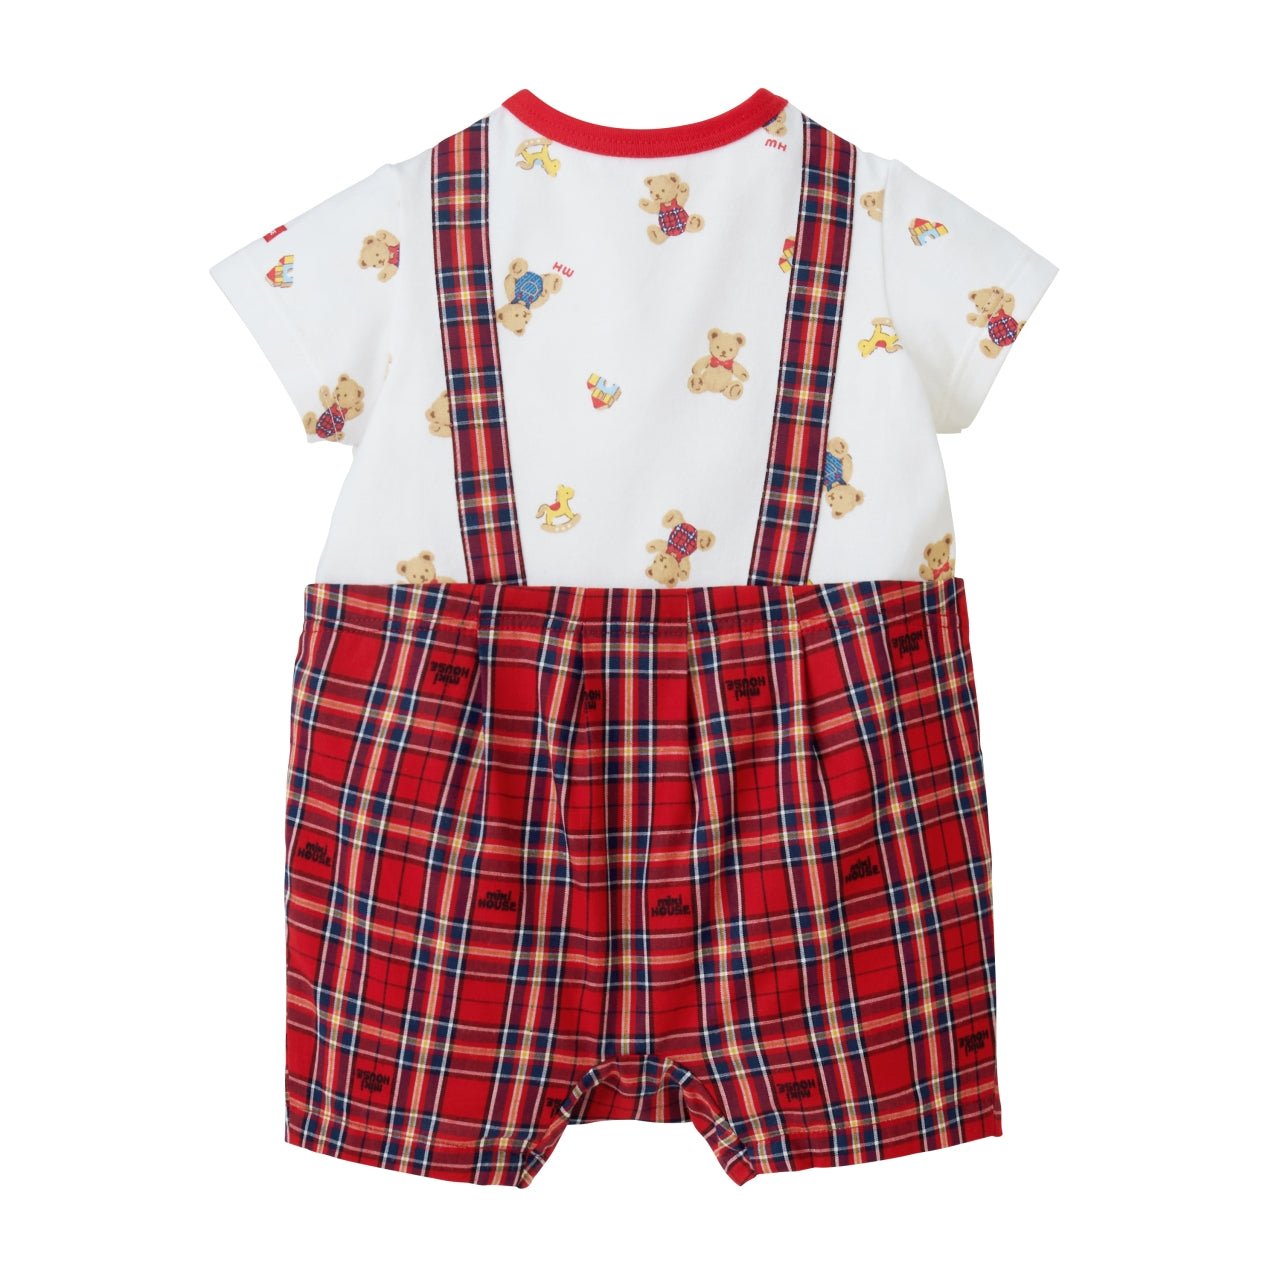 My Little Teddy Suspender Rompers - MIKI HOUSE USA